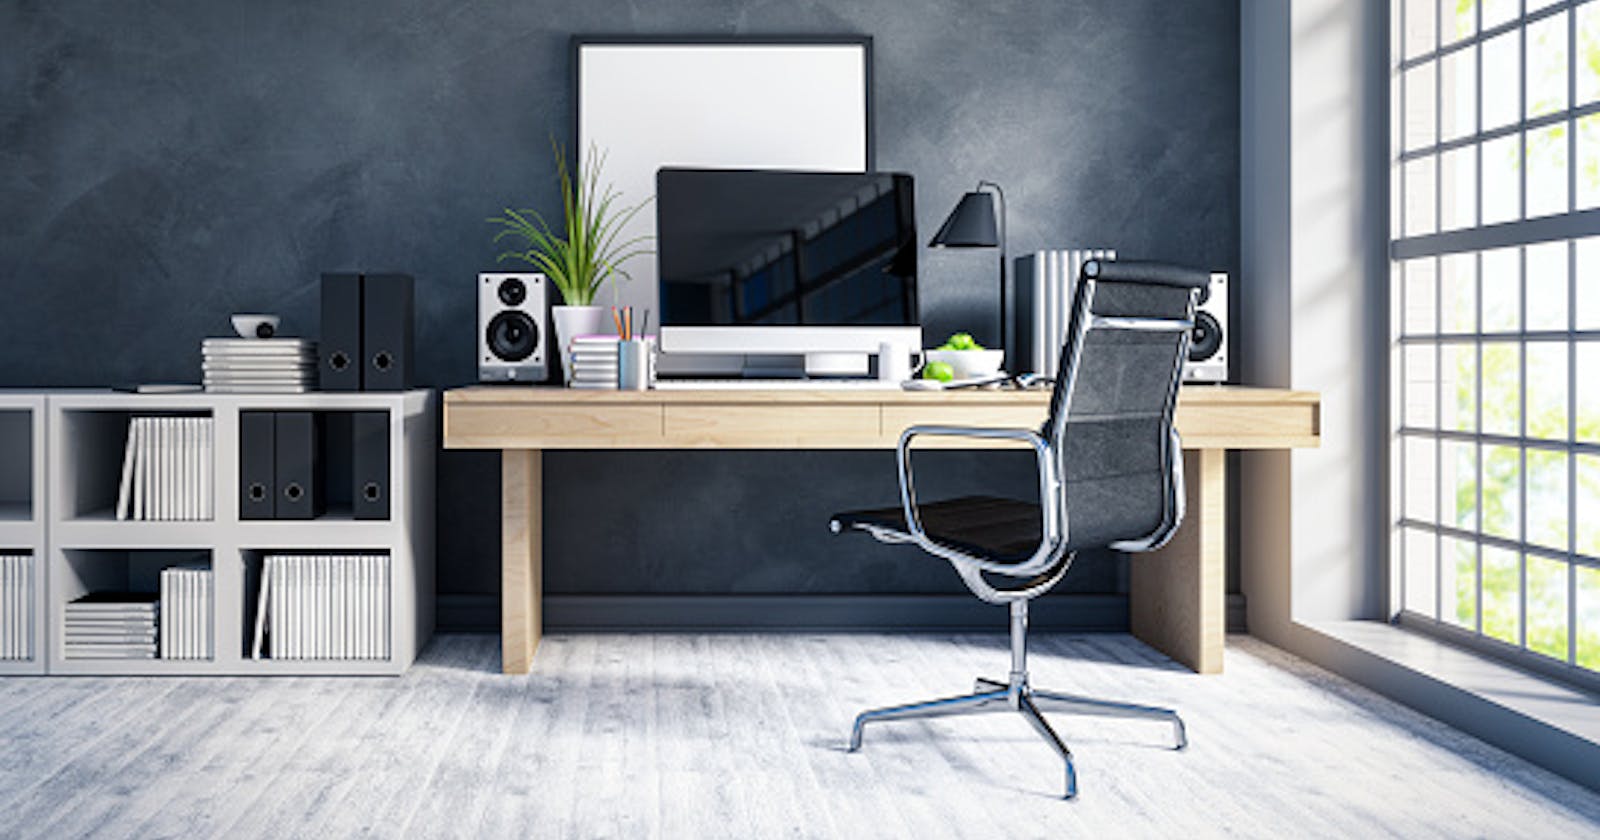 United States Home Office Furniture Market Size, Share, Outlook, Demand and Forecast 2027